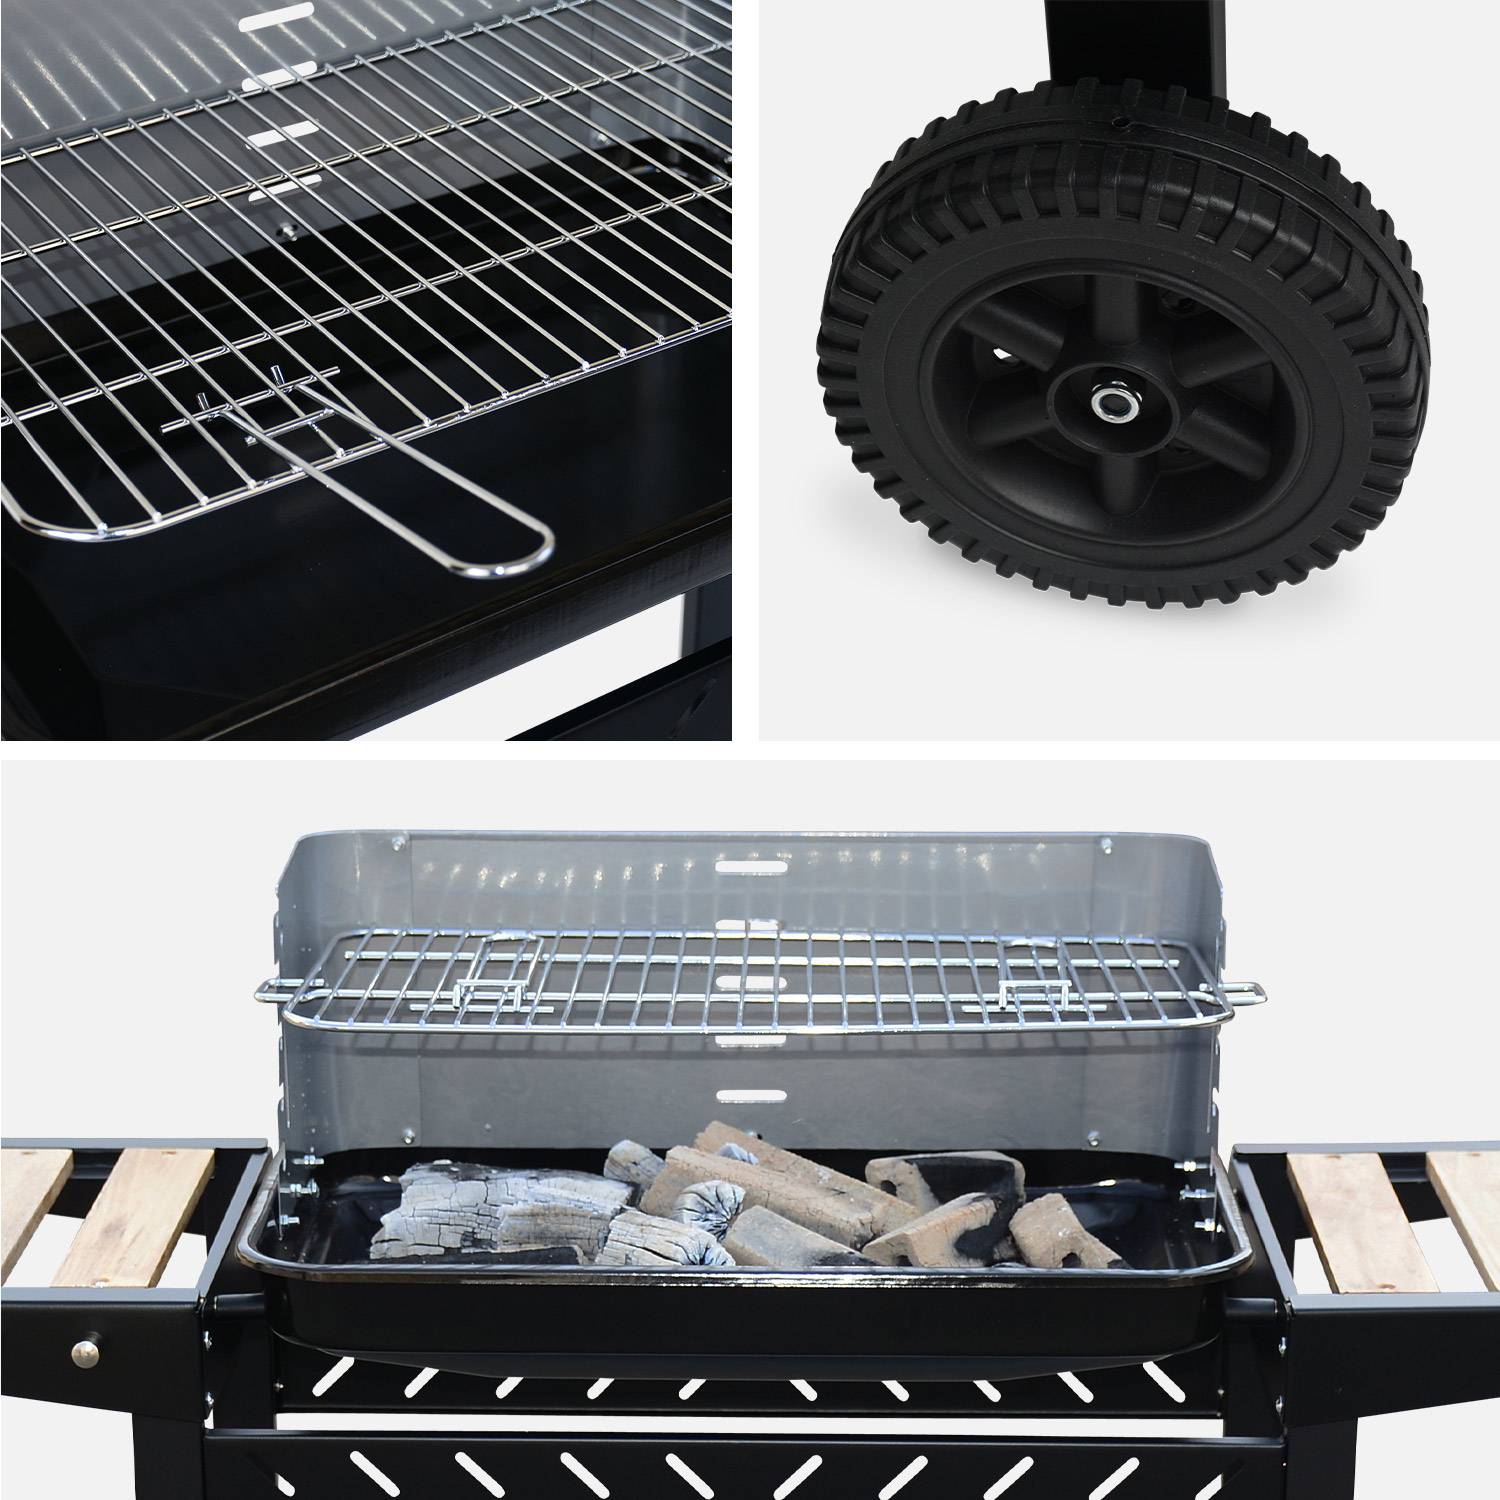 Charcoal barbecue,  adjustable grill height, enamelled bowl, wooden shelves, shelf and hooks, black and grey Photo5